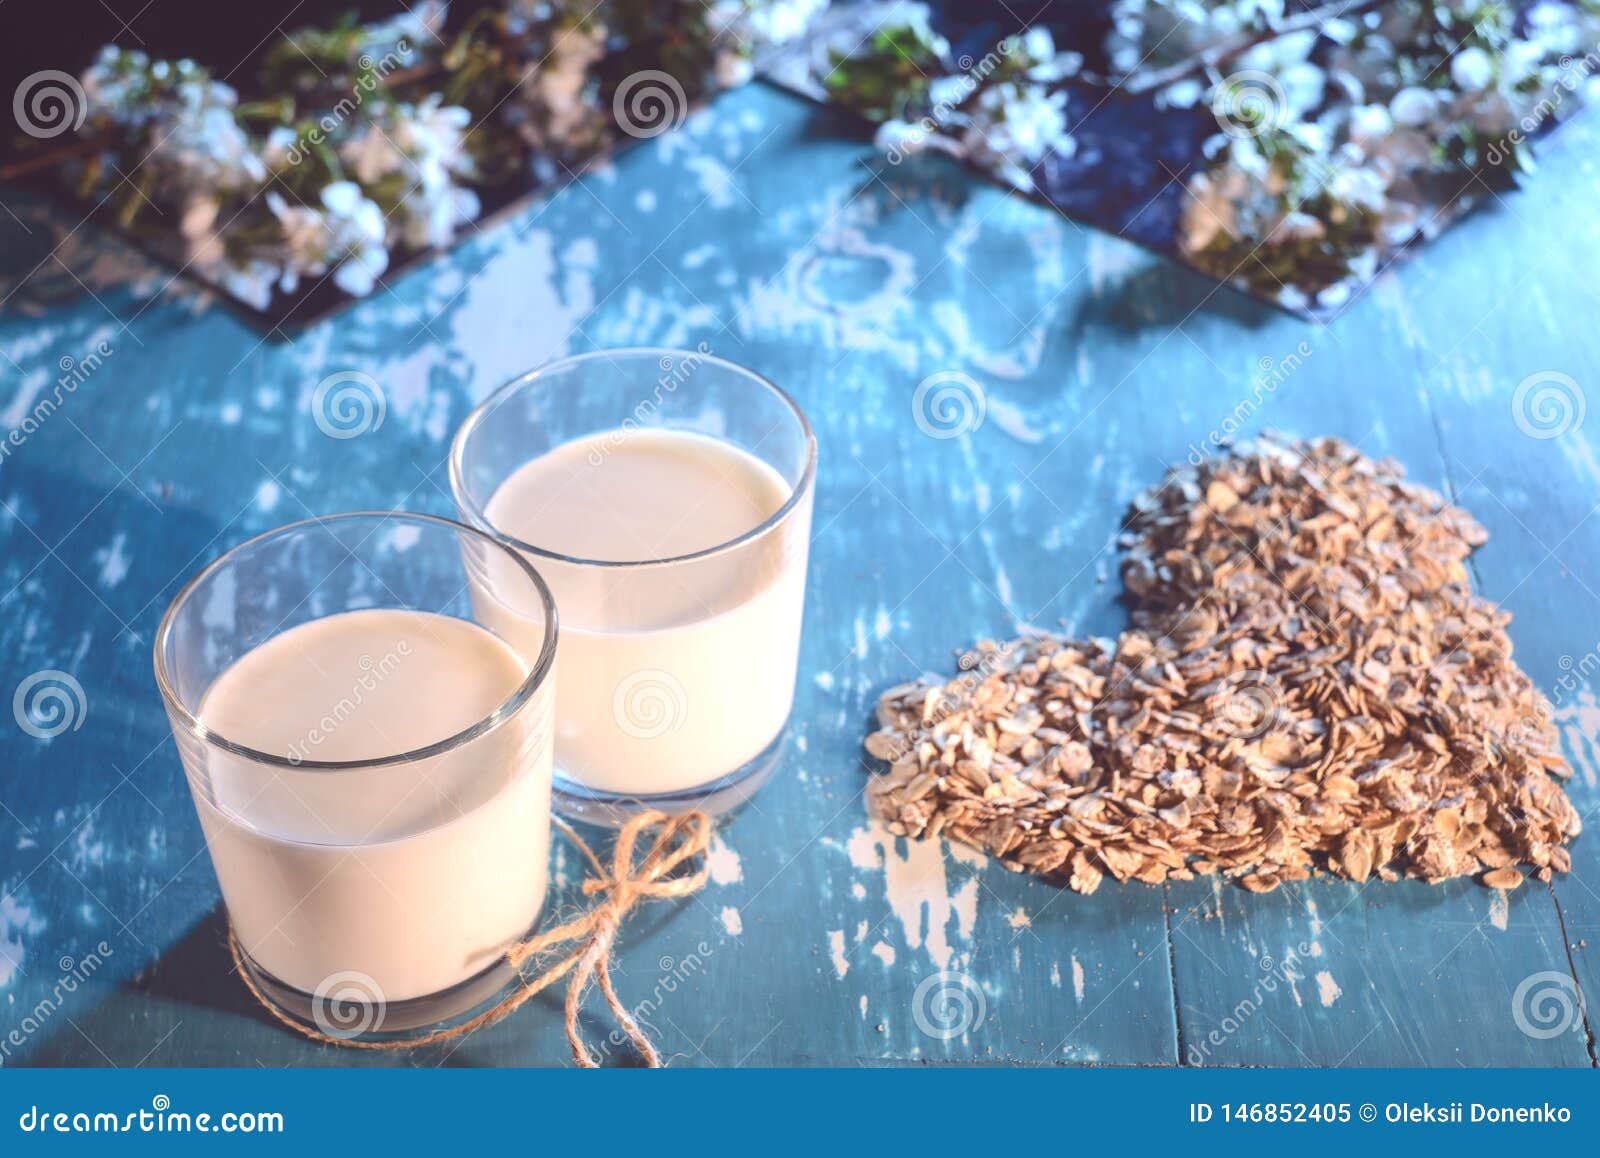 Two Glasses with Oat Milk in a Rustic Style. Vegetarian Breakfast on a